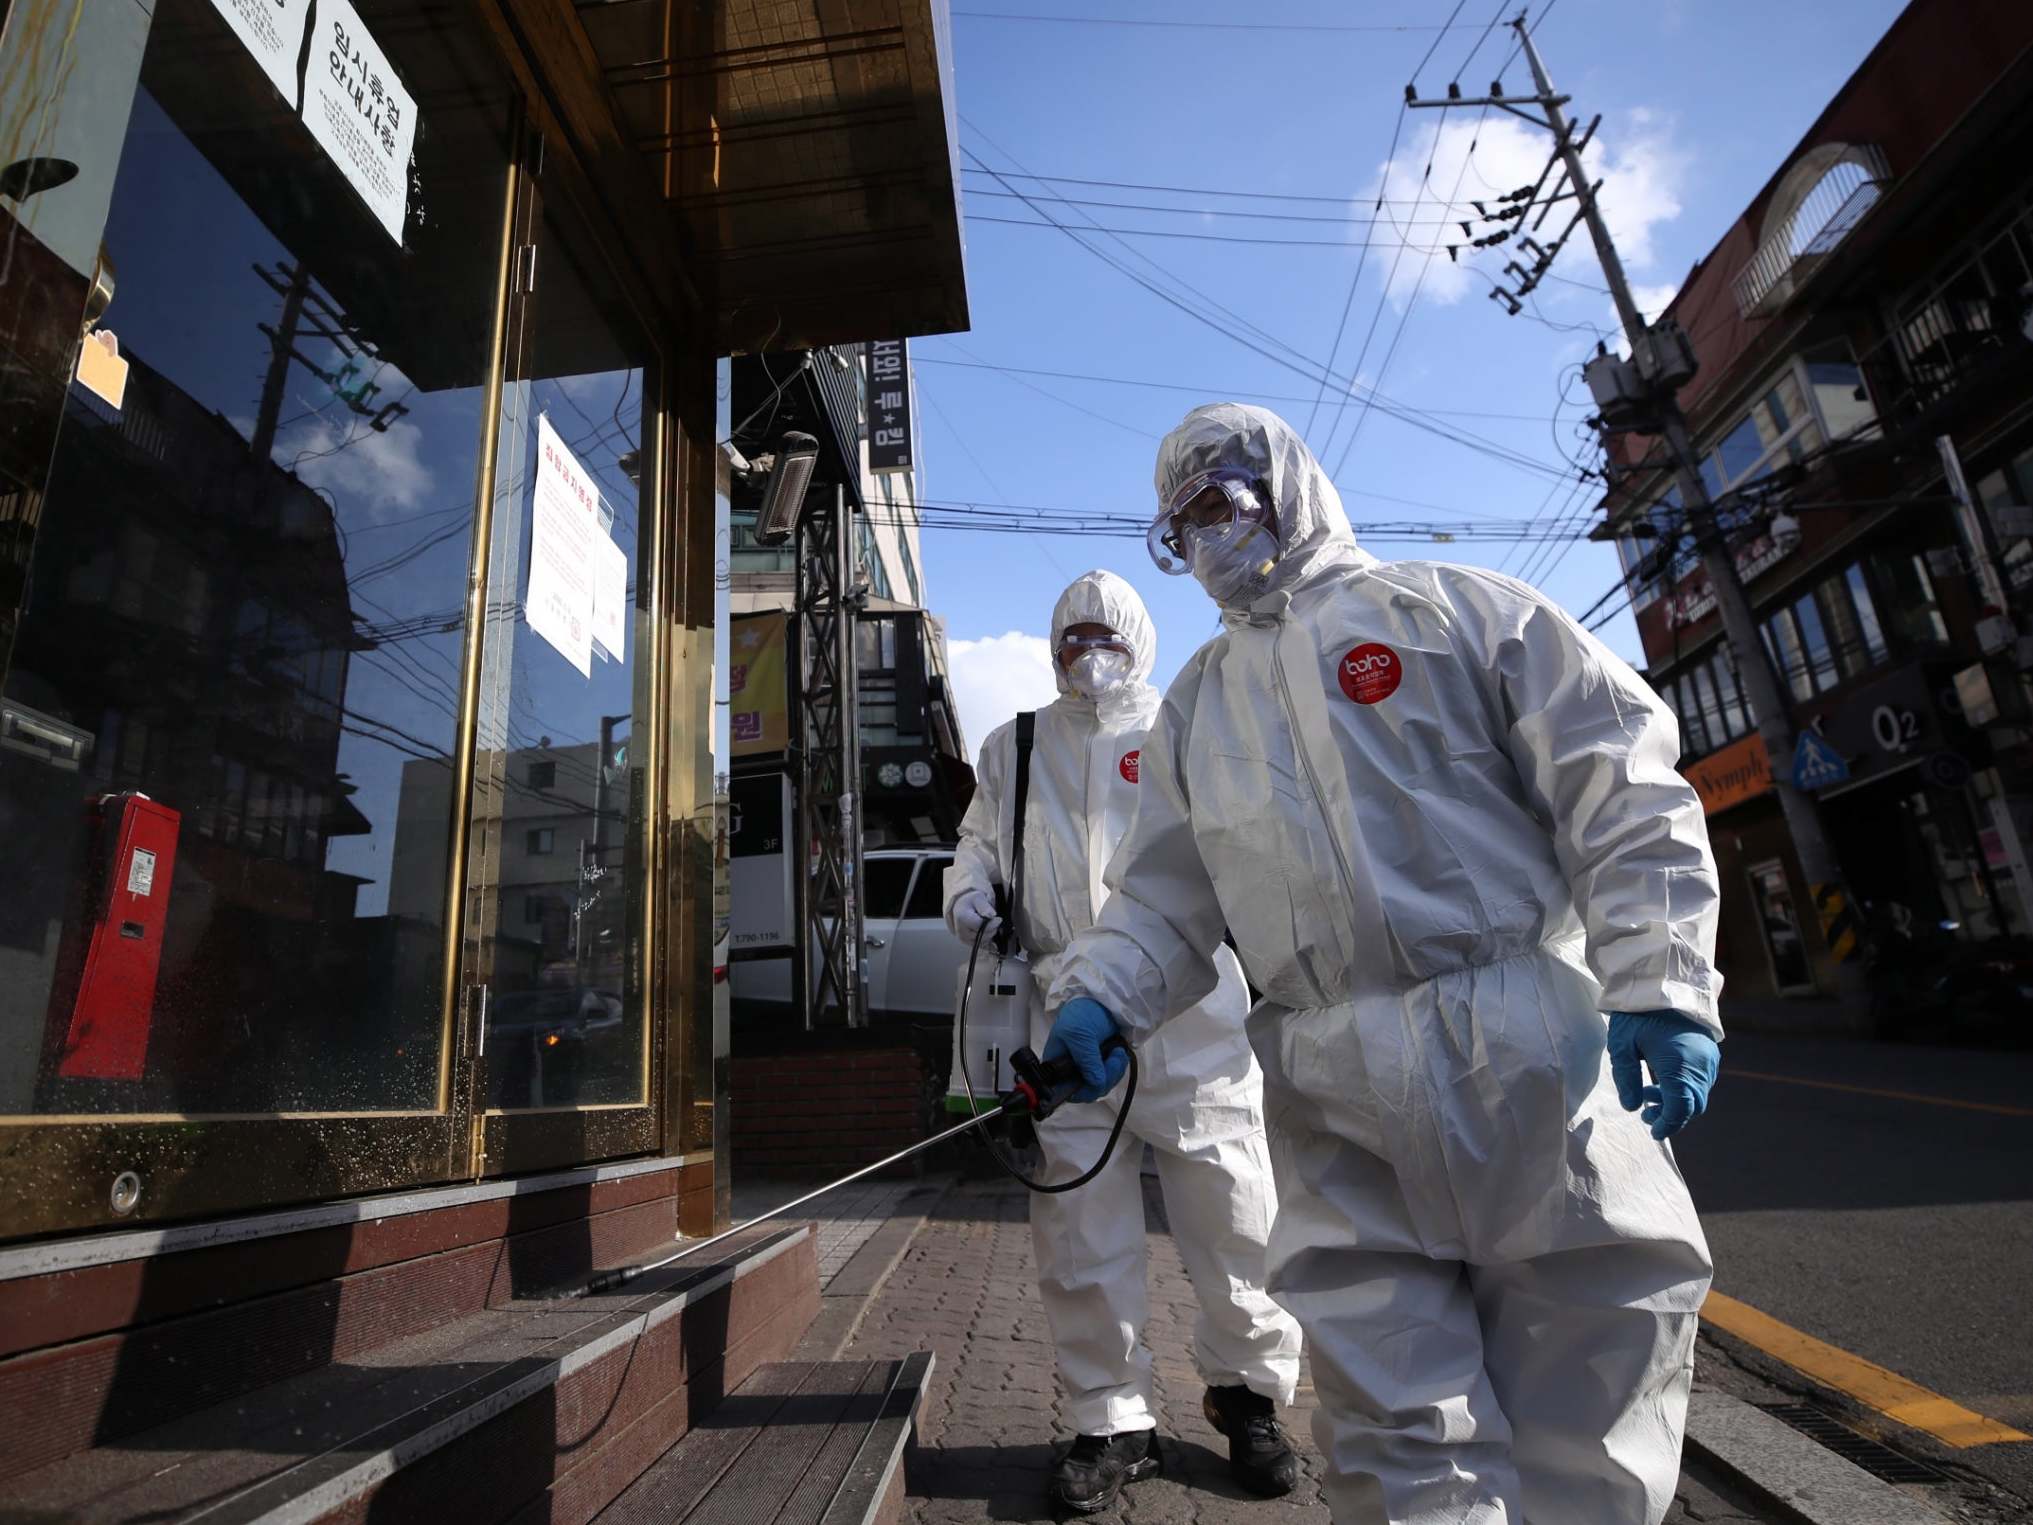 An outbreak of cases among visitors to Seoul's popular Itaewon district (pictured) has sparked fears of a second wave of the virus